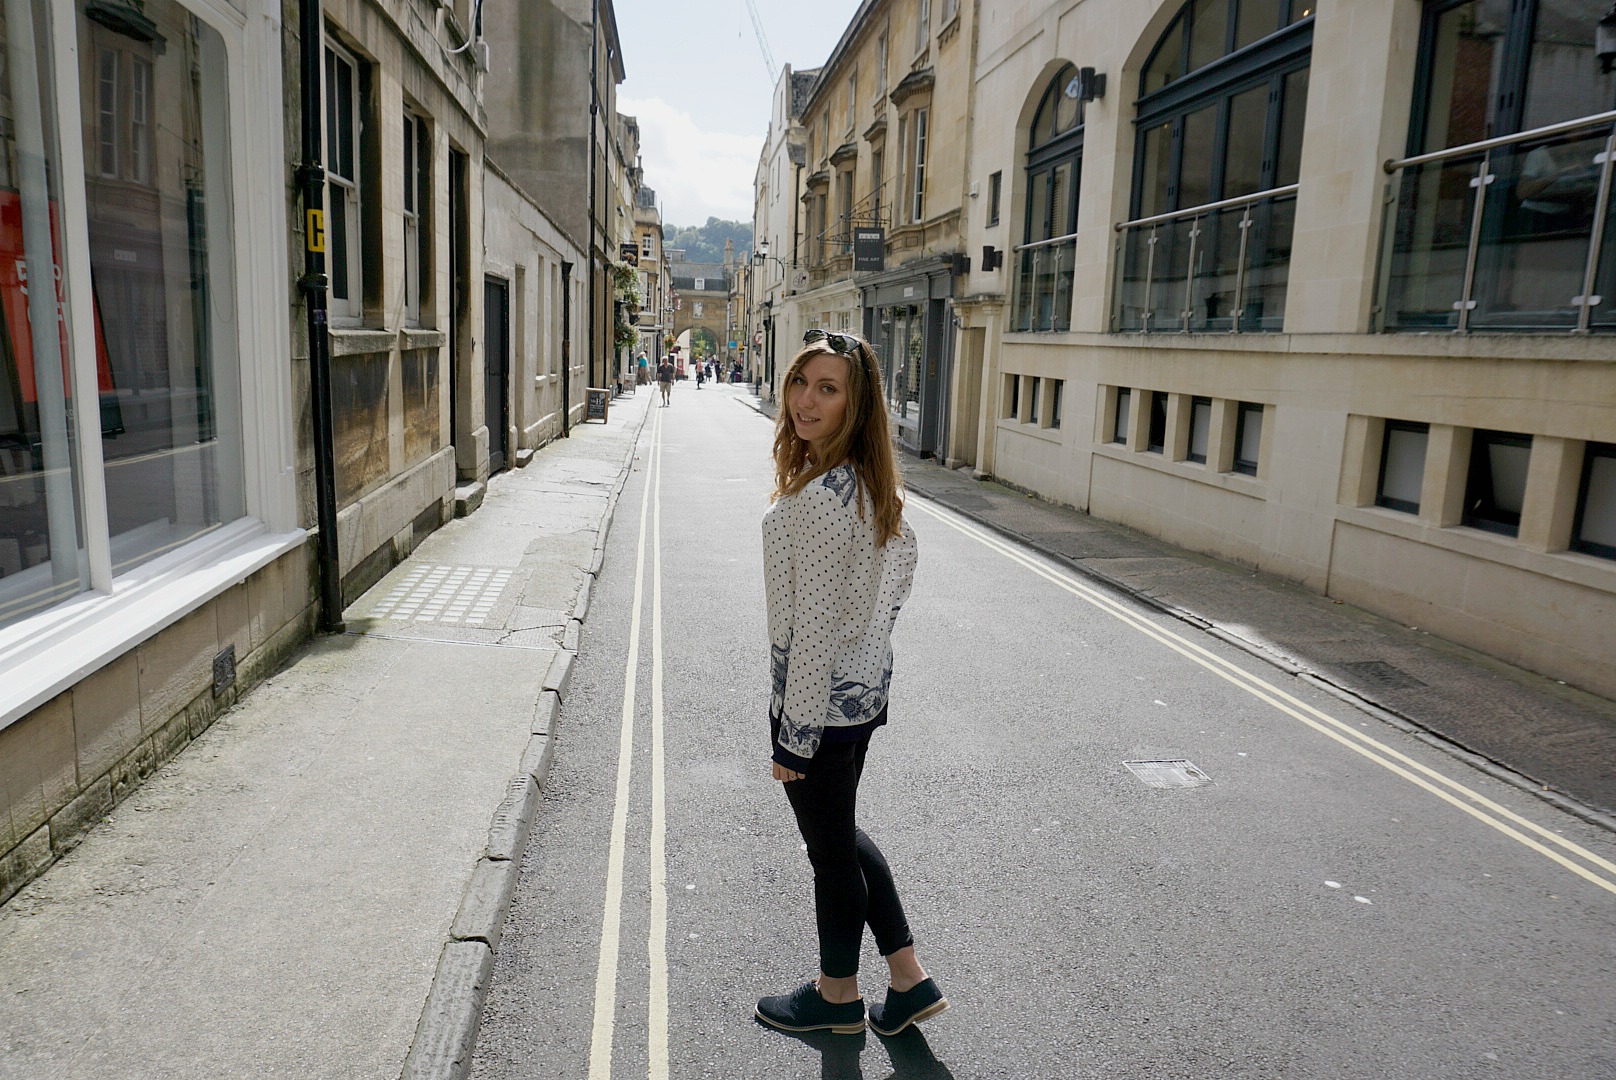 You Could Travel Streets of Bath